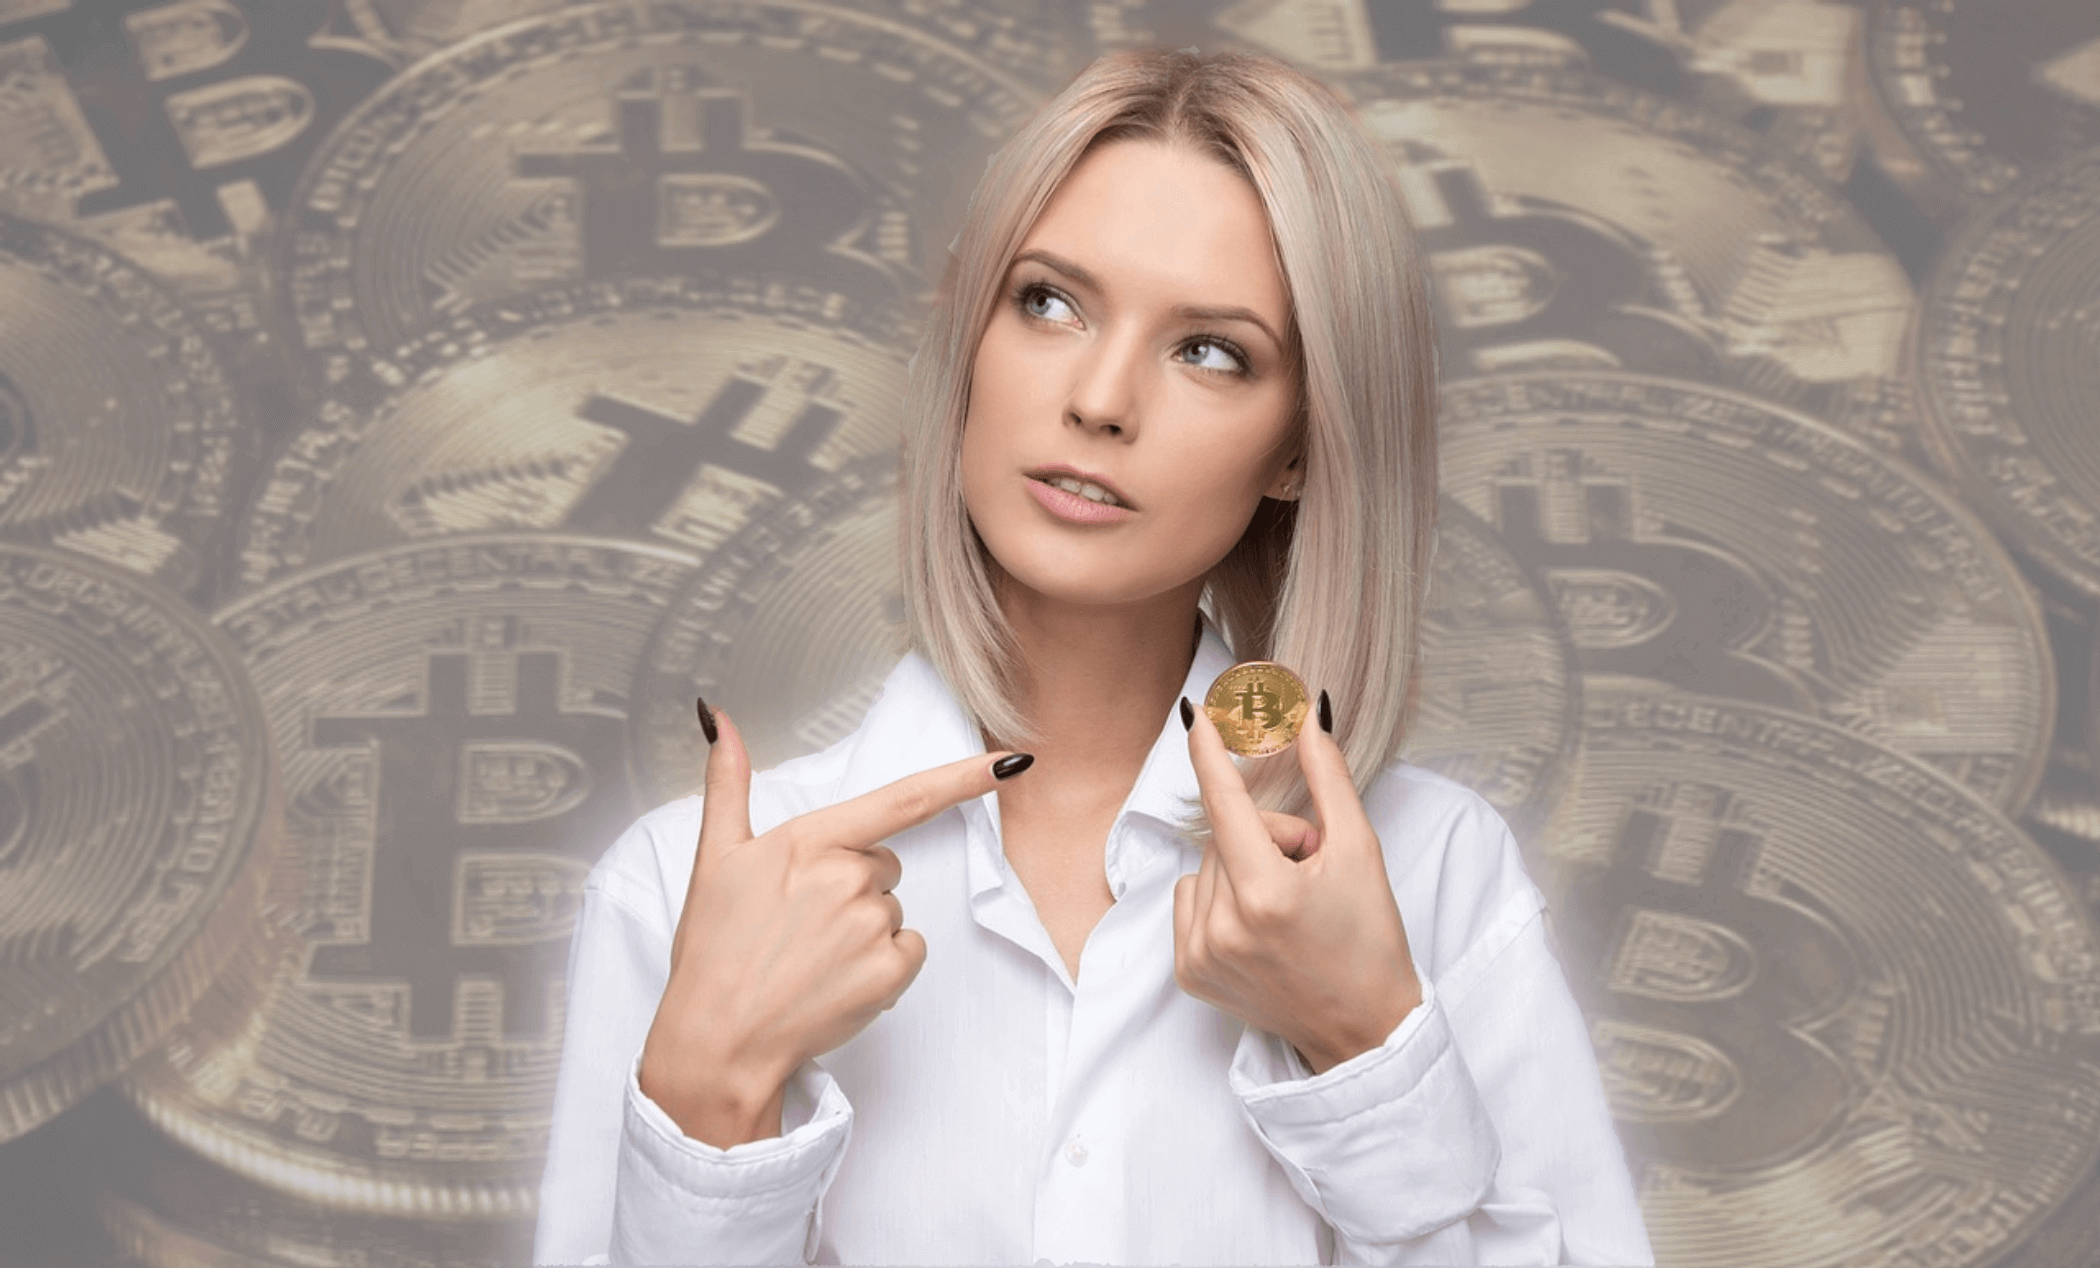 Crypto Company Accidentally Paid a Woman $10.5 Million Refund Instead Of $100, She Buys A Mansion